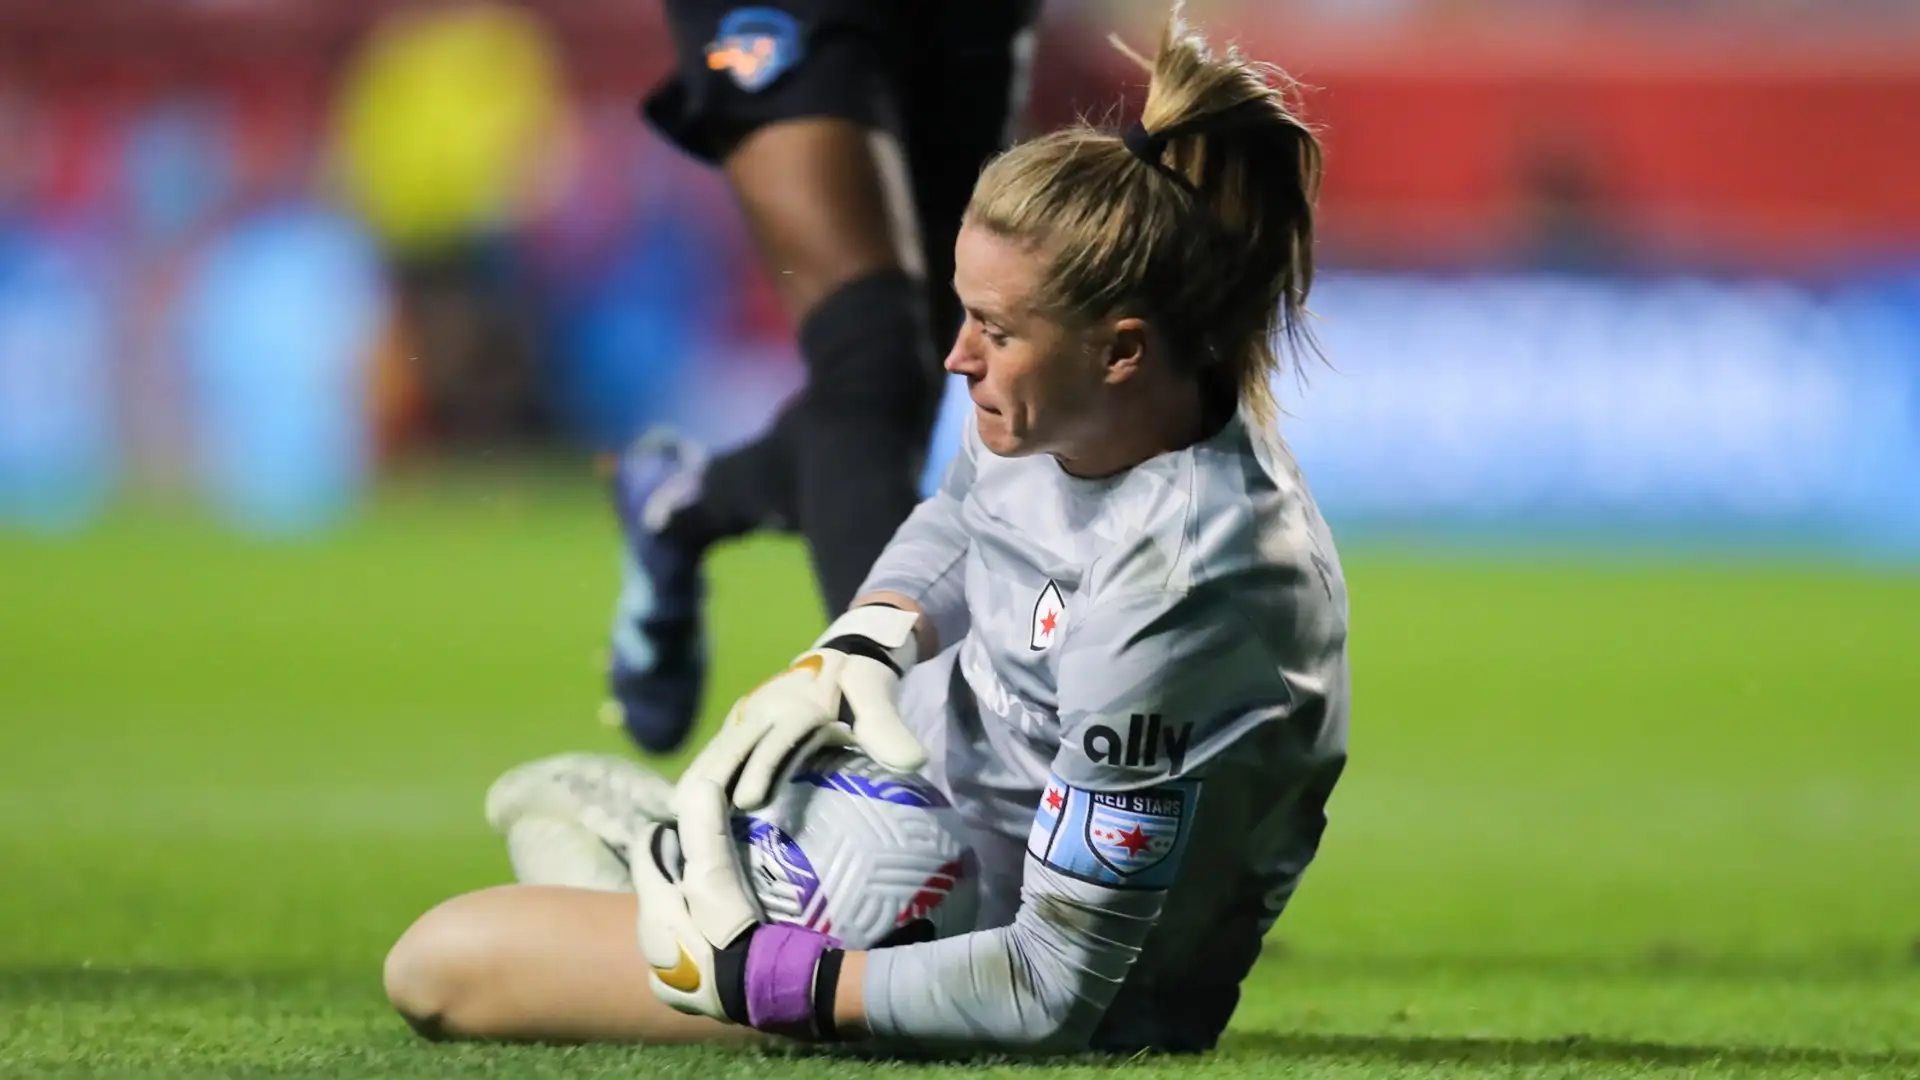 USWNT goalkeeper Alyssa Naeher subbed off with injury for Chicago Red Stars - as Emma Hayes' presented with yet another worry for debut June camp